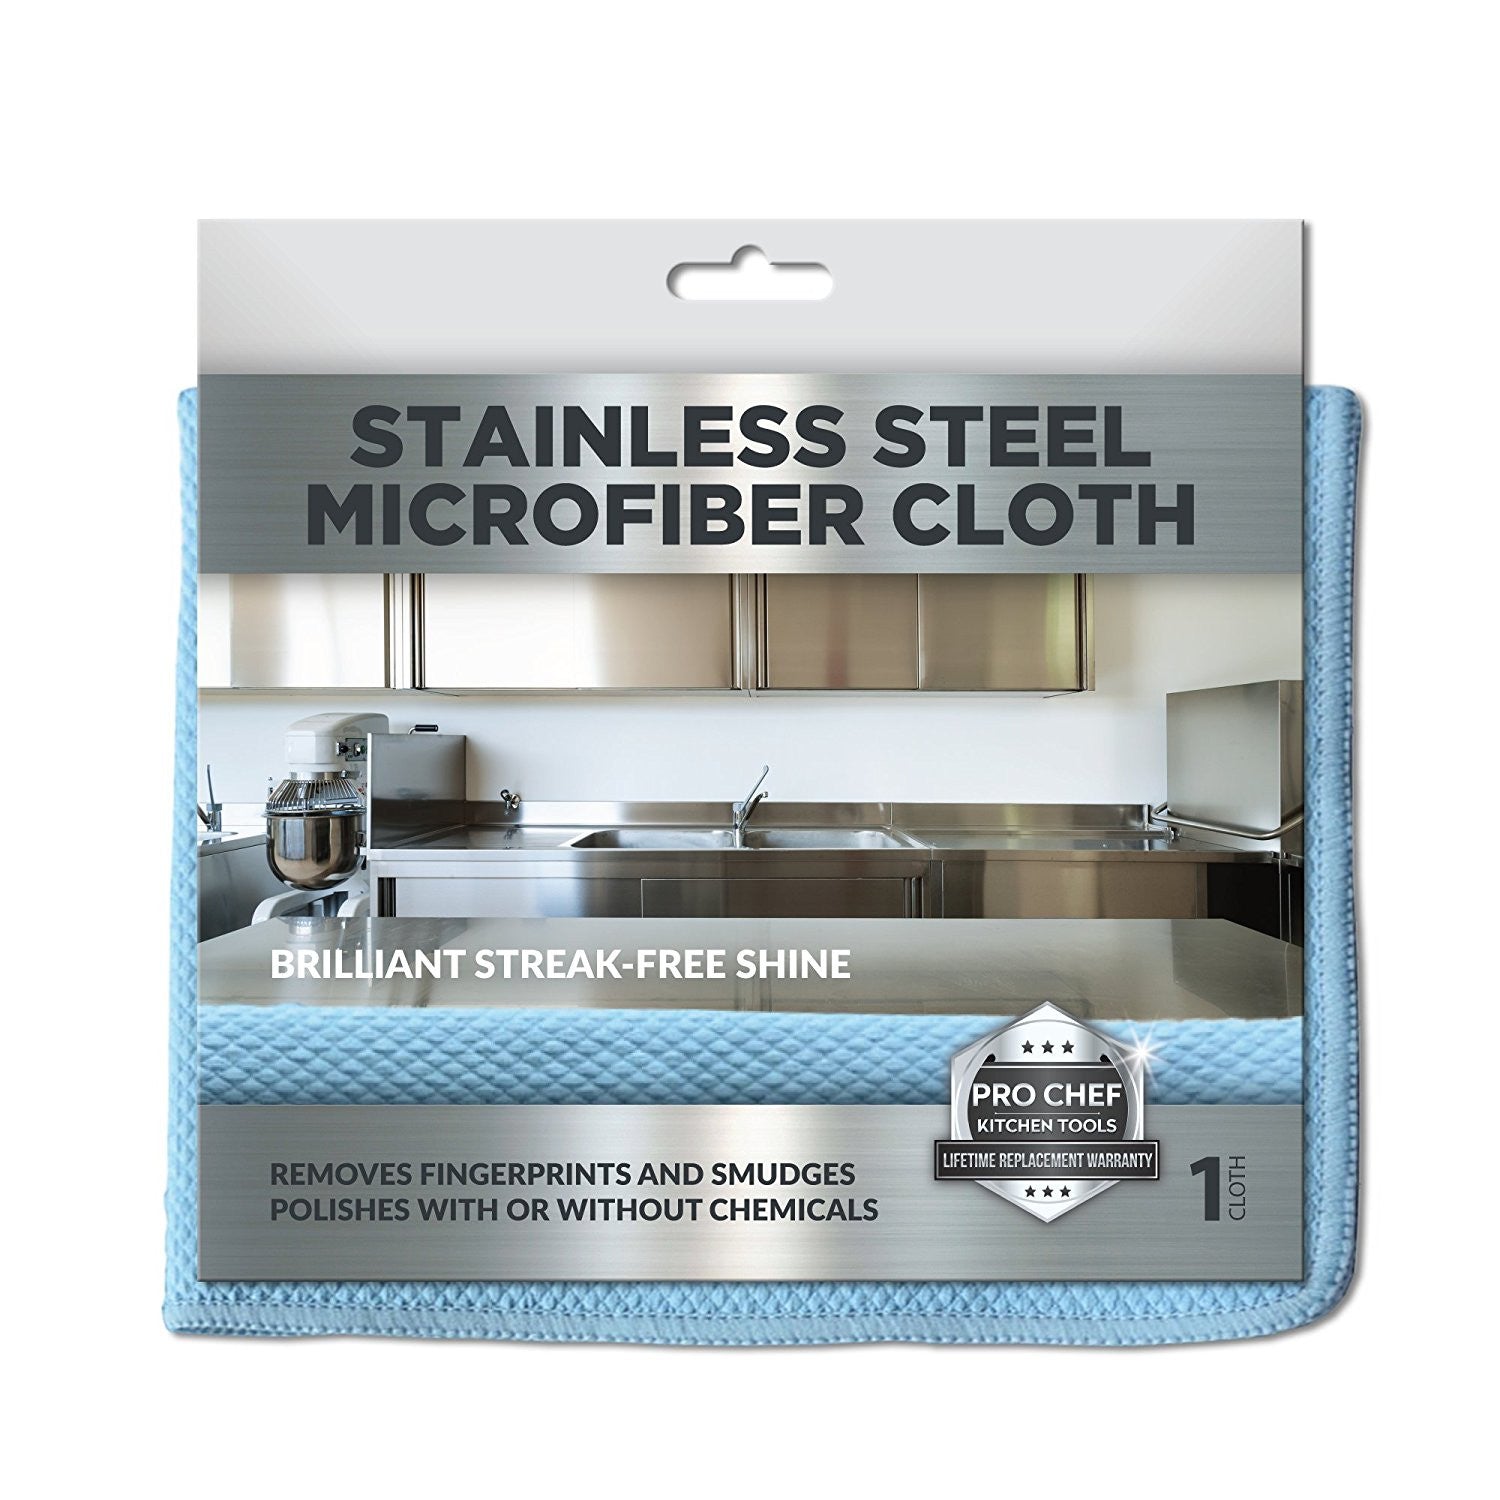 E-Cloth Stainless Steel Cleaning Cloth, Microfiber Stainless Steel Cleaner  for a Spotless Shine Home Appliances, Oven, Stove and Refrigerators